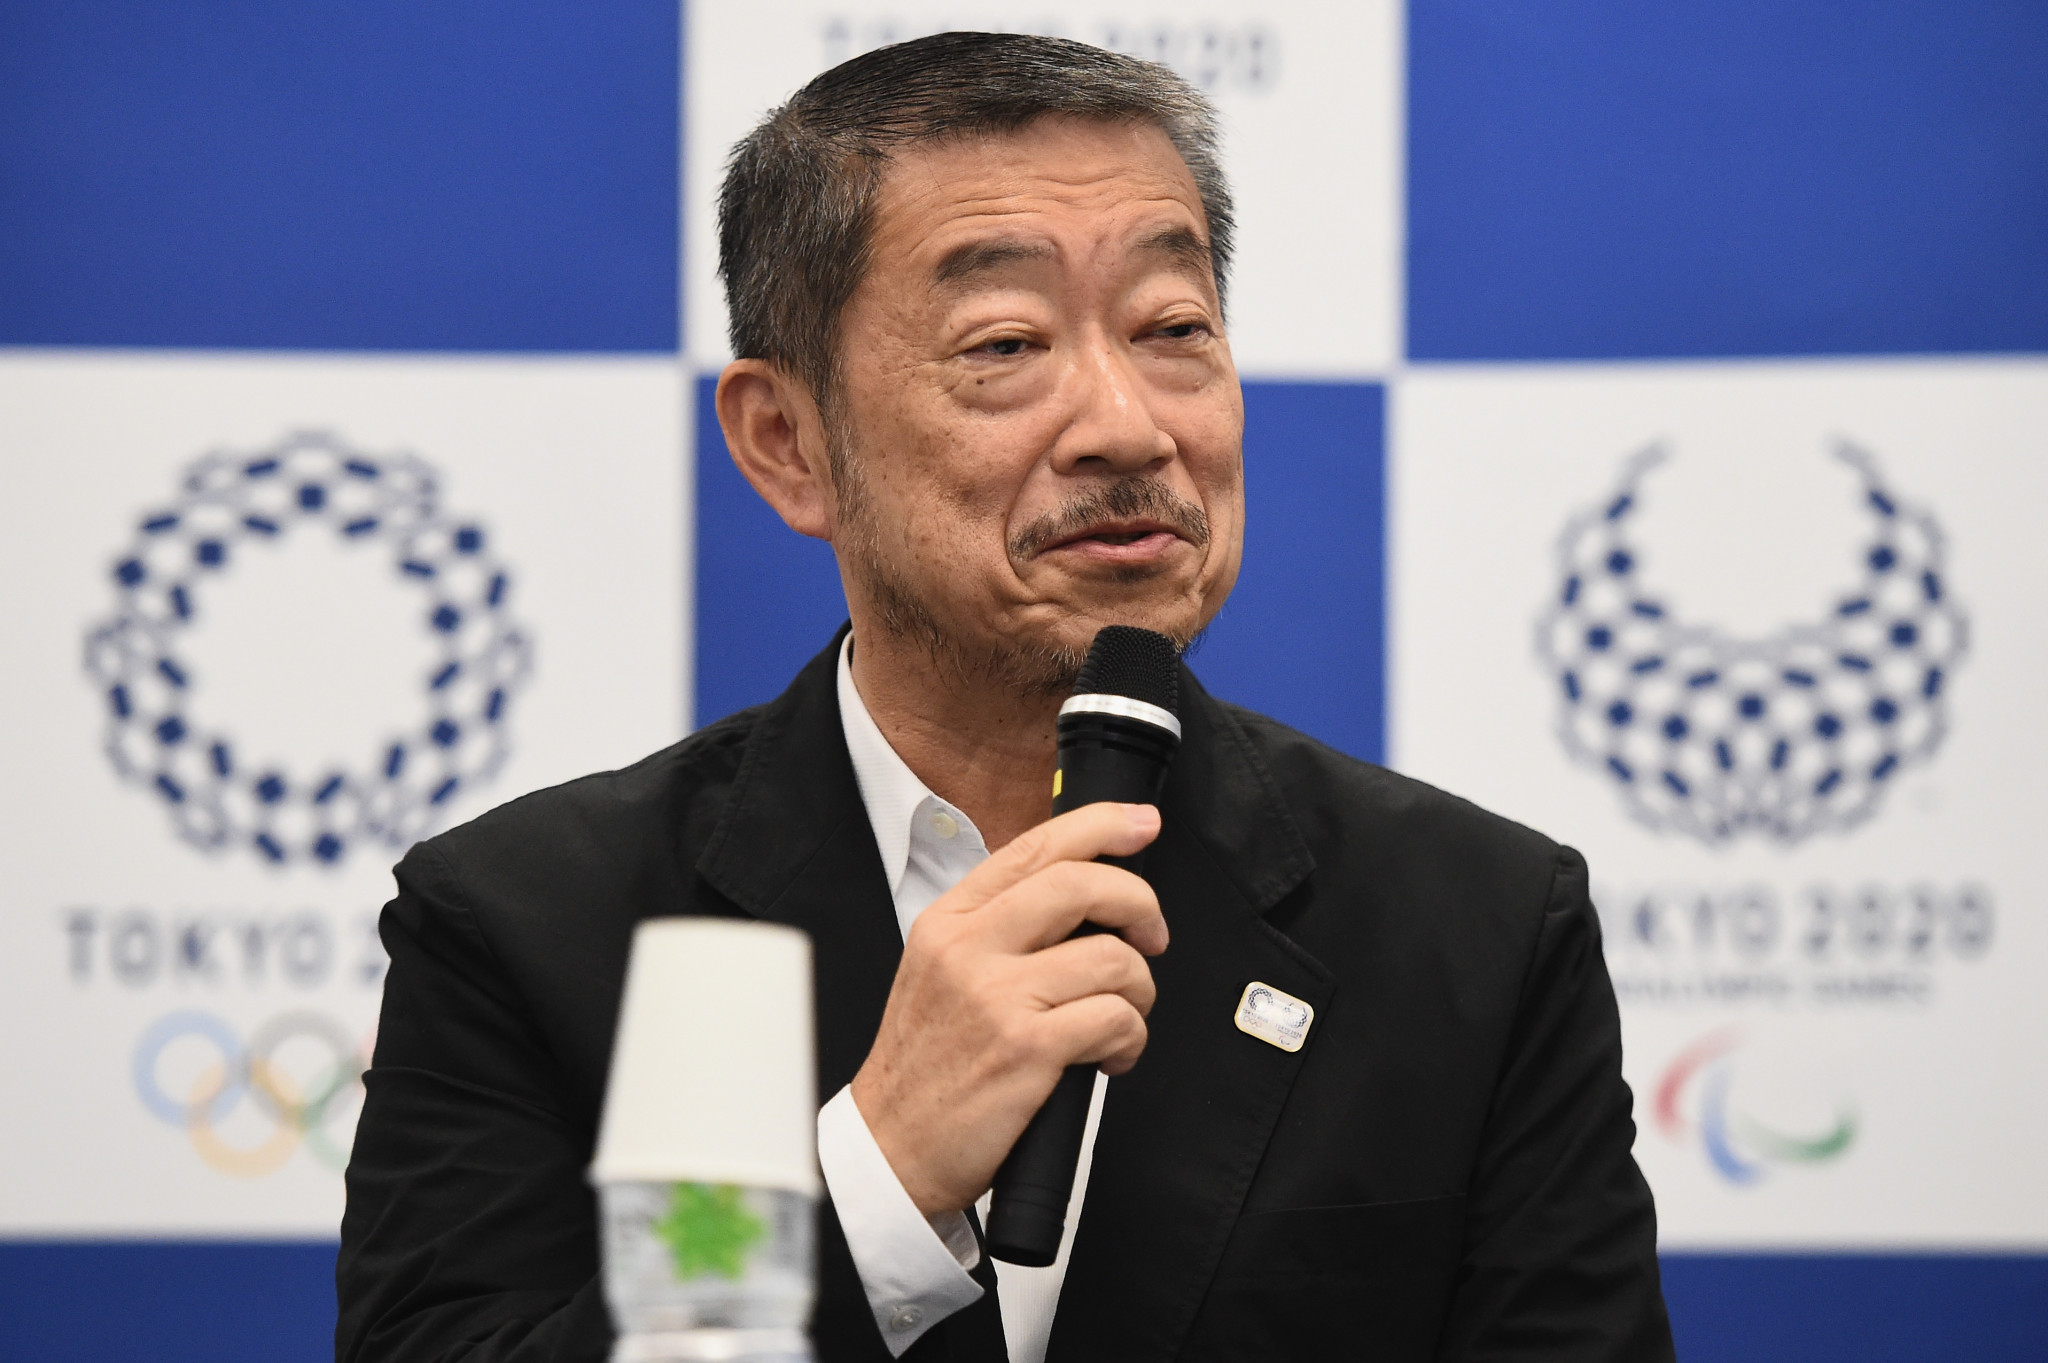 Hiroshi Sasaki has been announced as the new executive creative director for the Tokyo 2020 Opening and Closing Ceremonies ©Getty Images